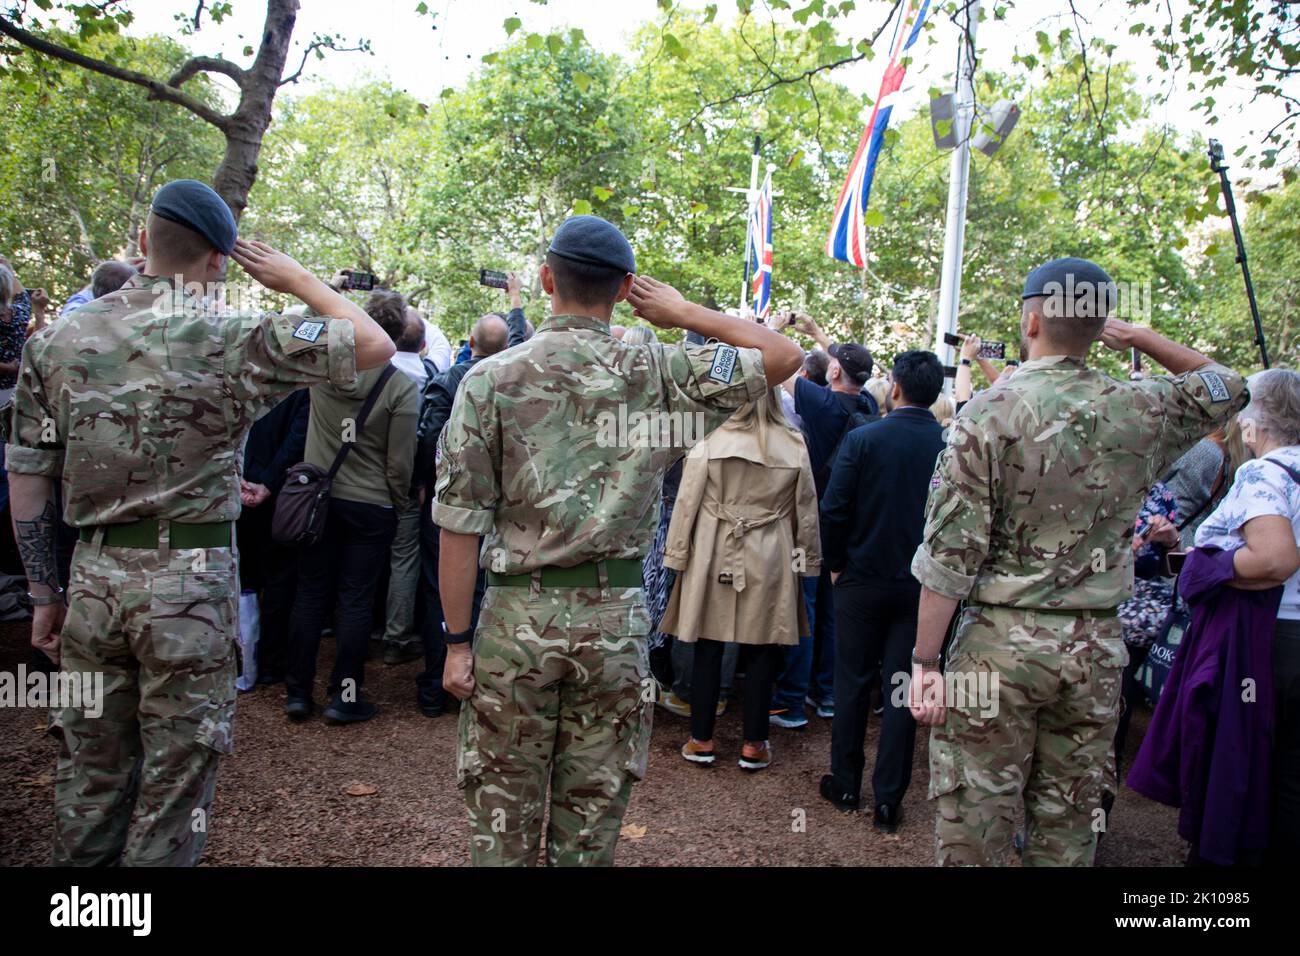 London, England. 14th September, 2022. Soldiers pay their respects as the Queen makes her final journey to Westminster Hall where she will be lying in state until the day of her funeral. Credit: Kiki Streitberger / Alamy Live News Stock Photo